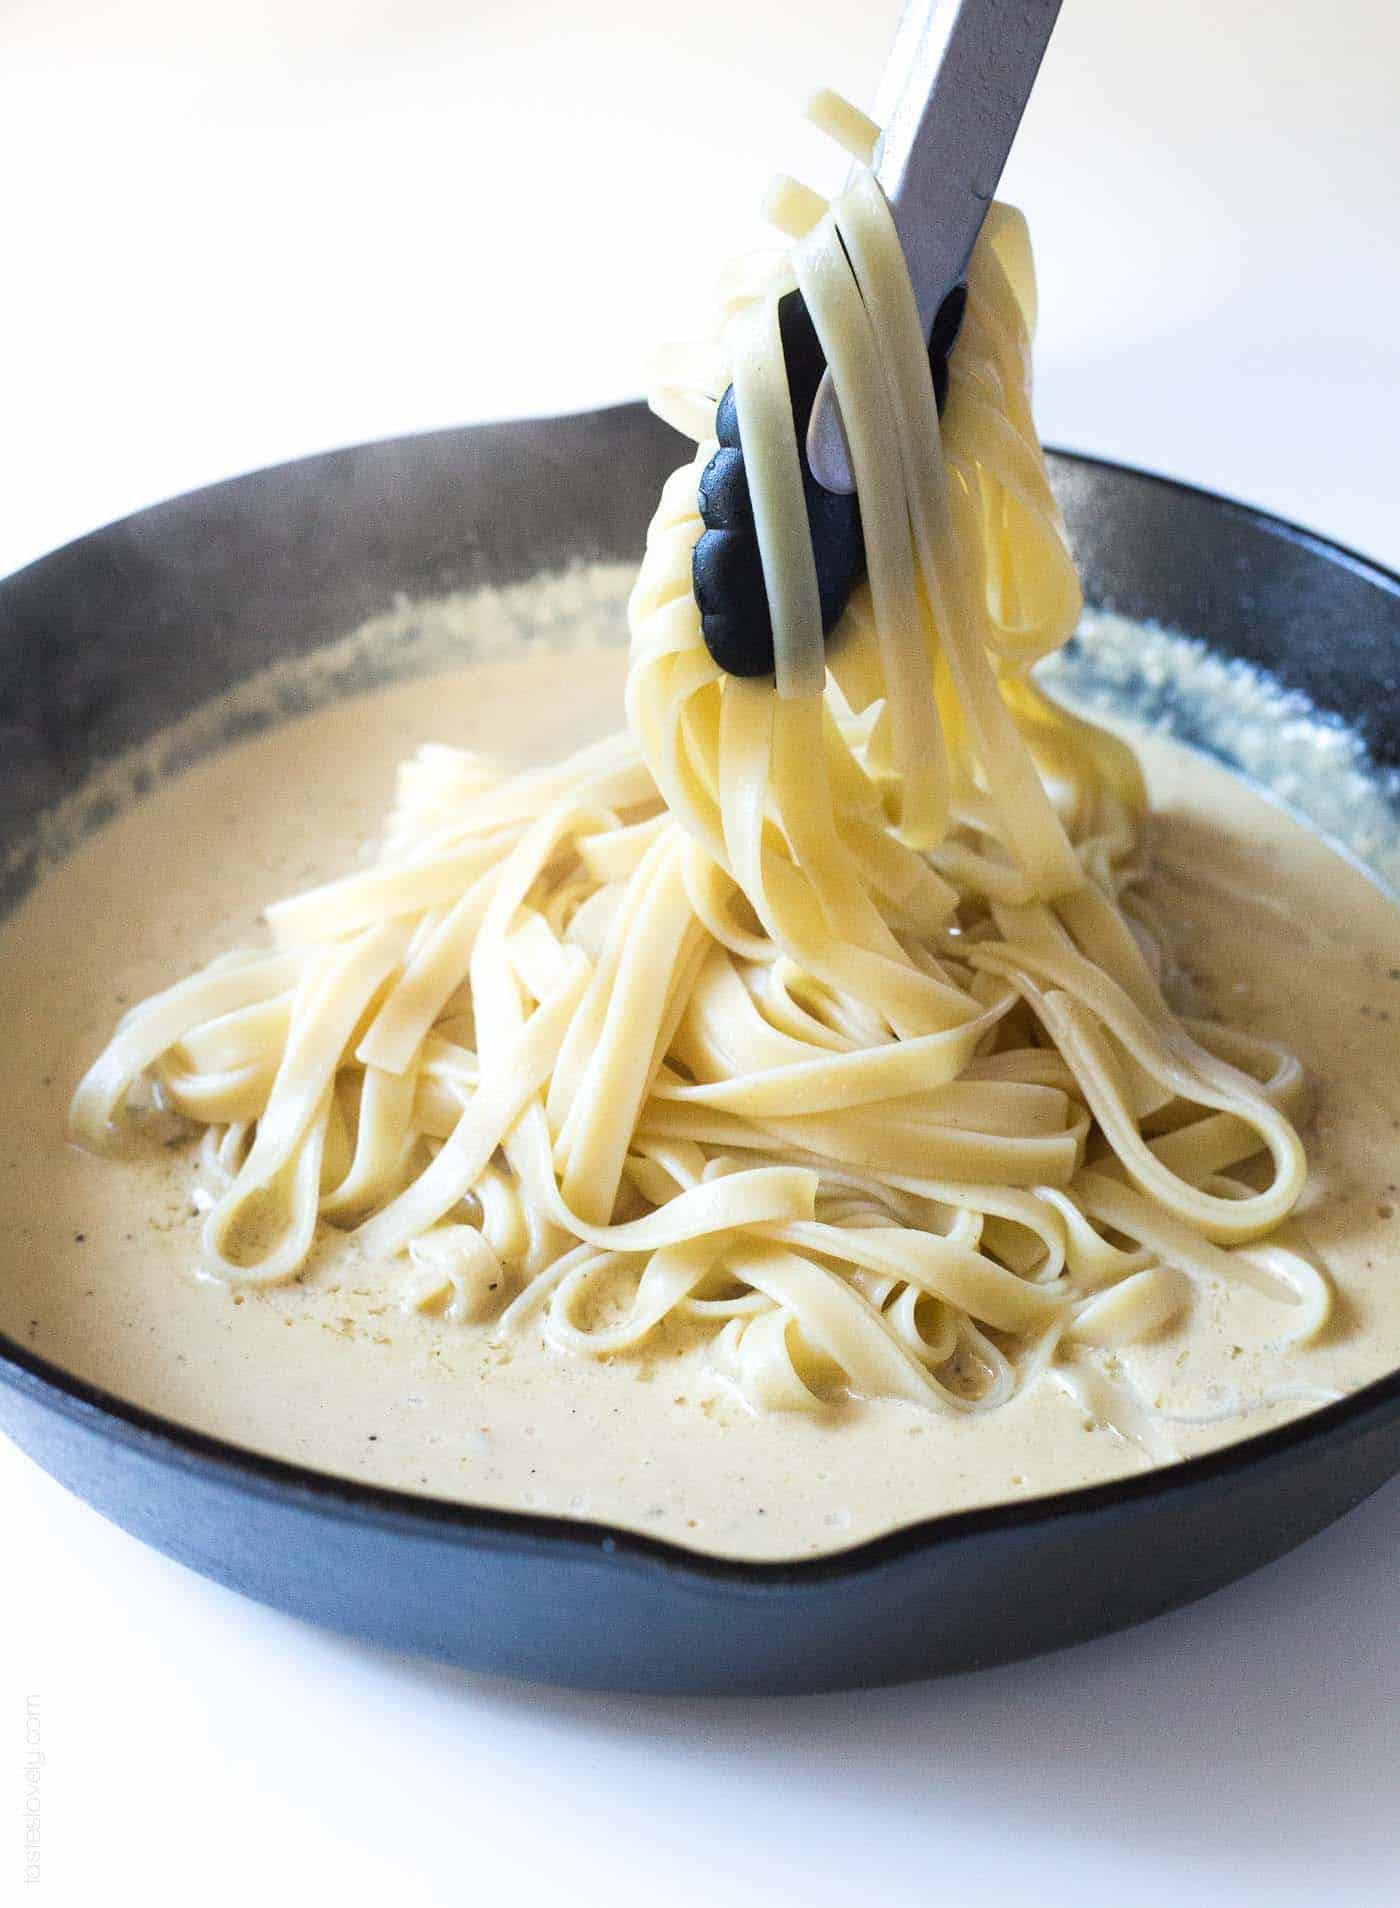 Noodles being dipped in homemade alfredo sauce in a cast iron skillet